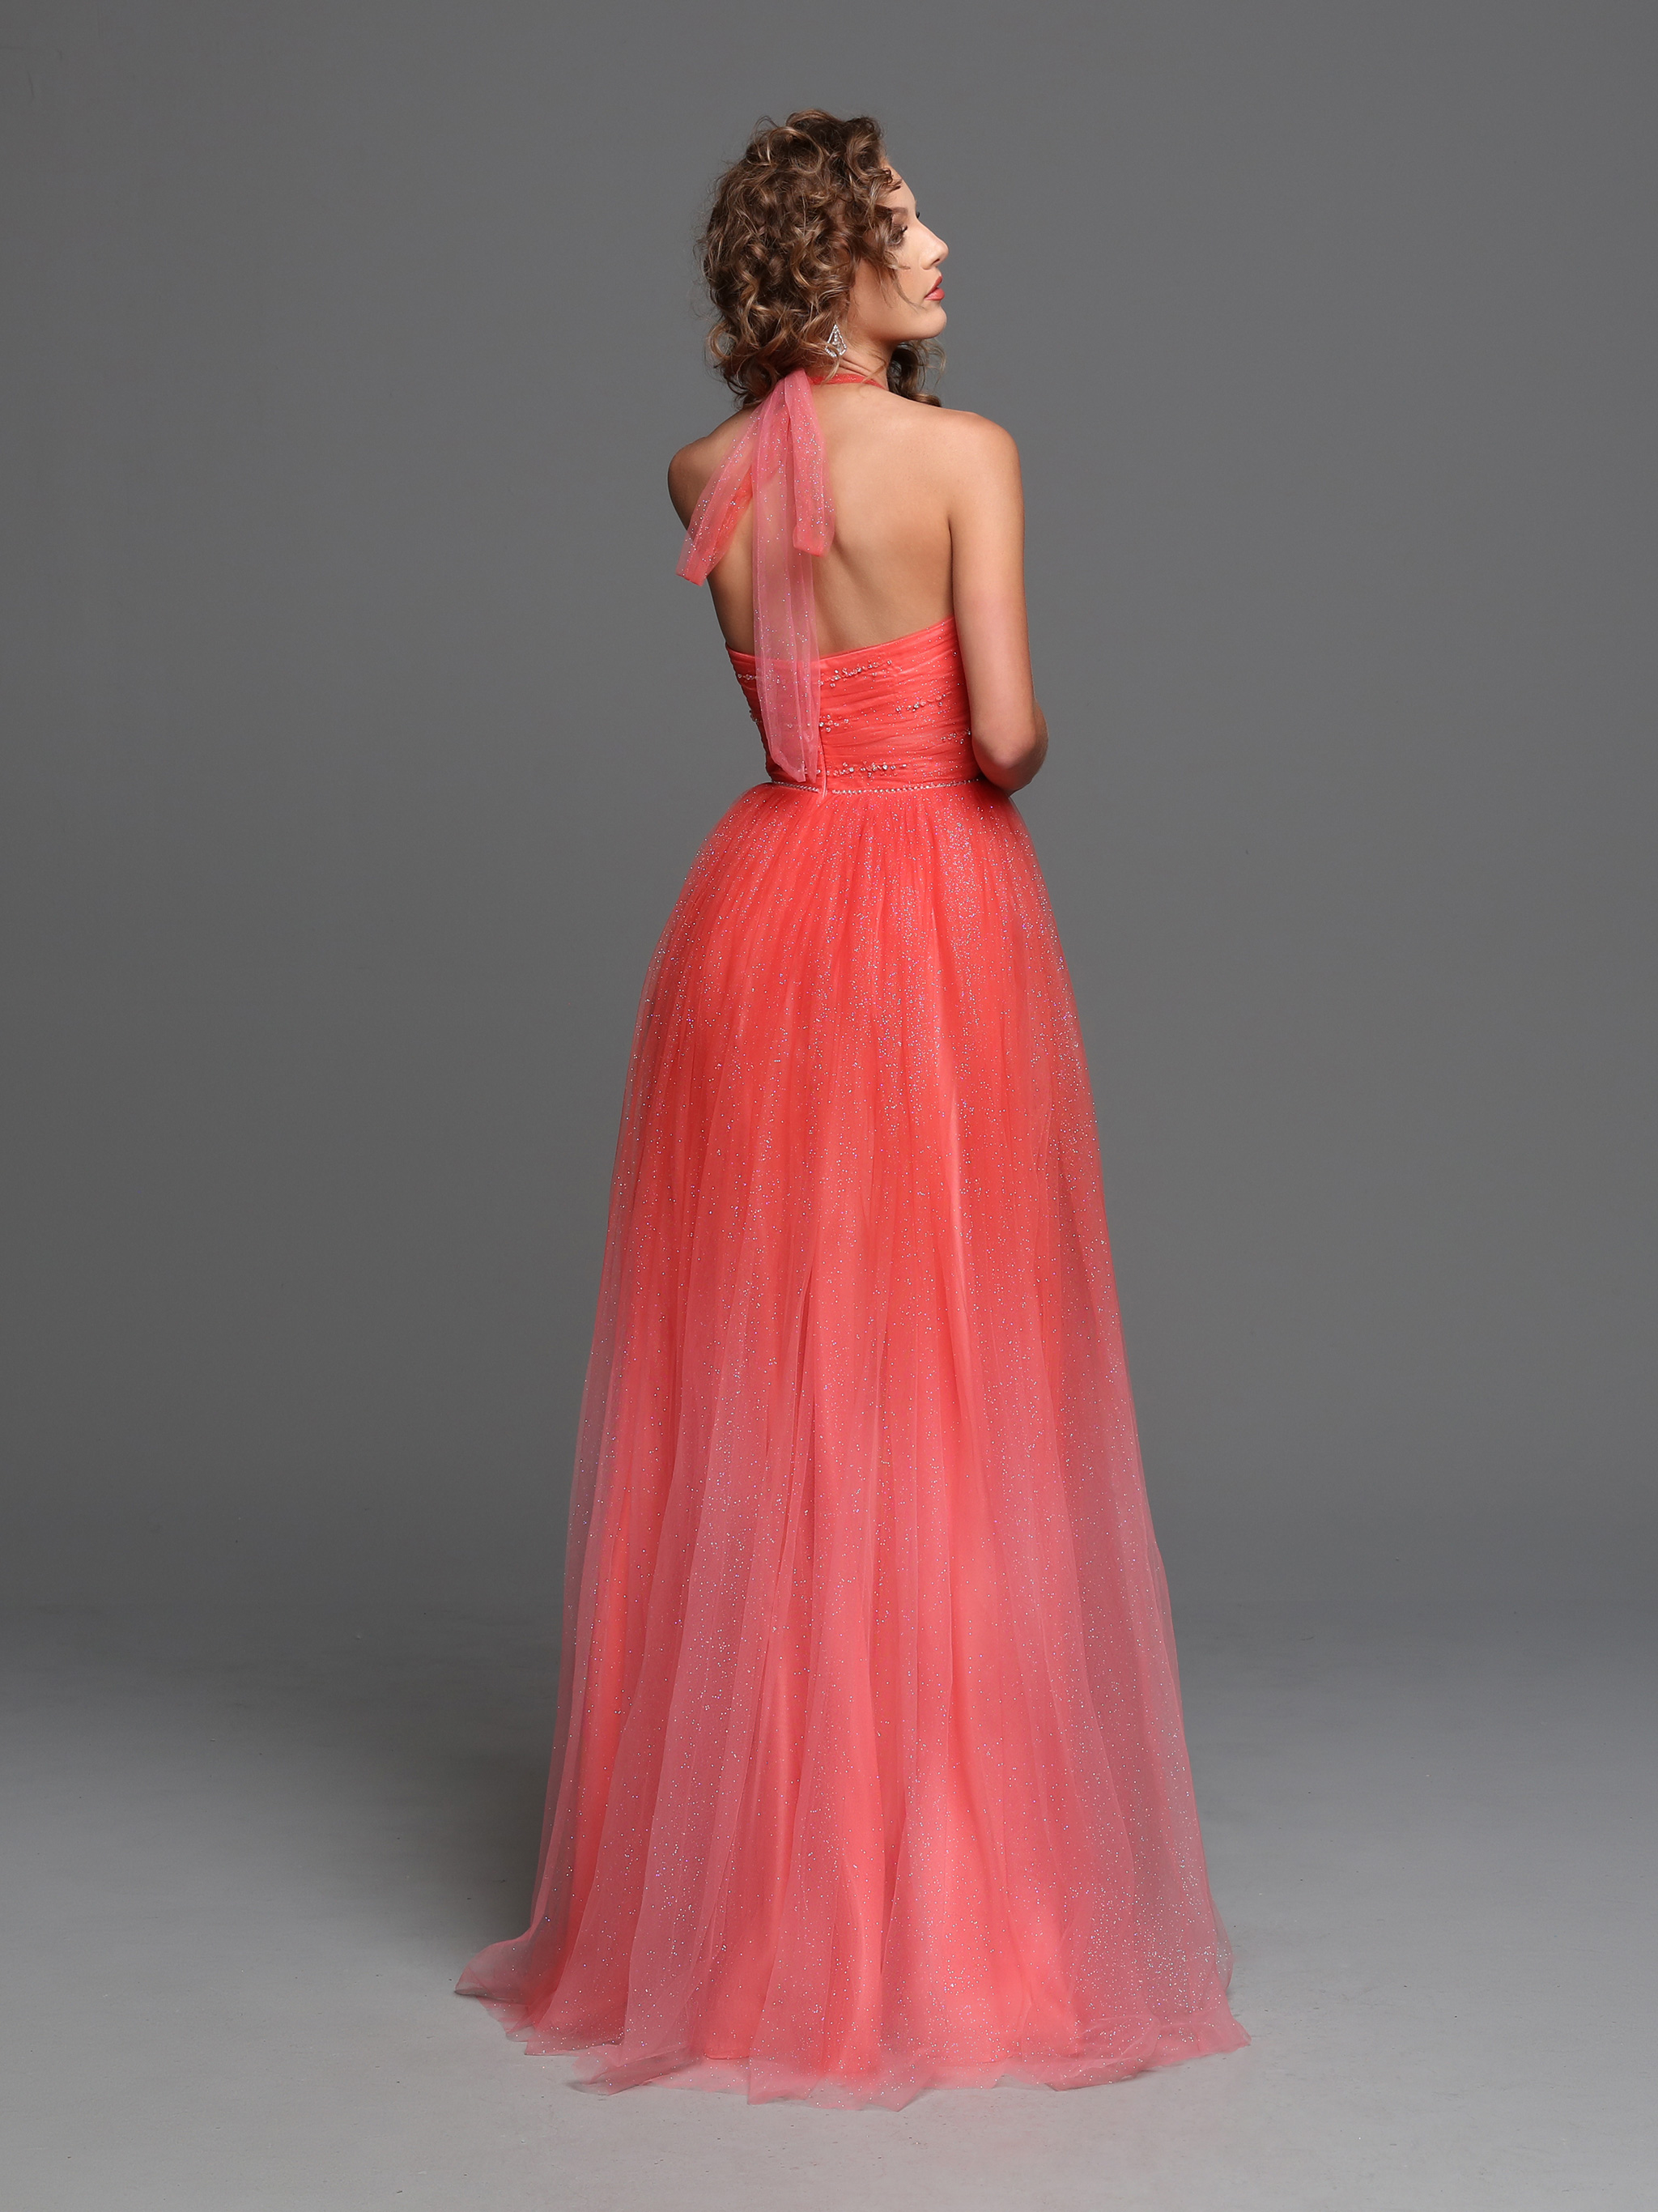 Image showing back view of style #72242